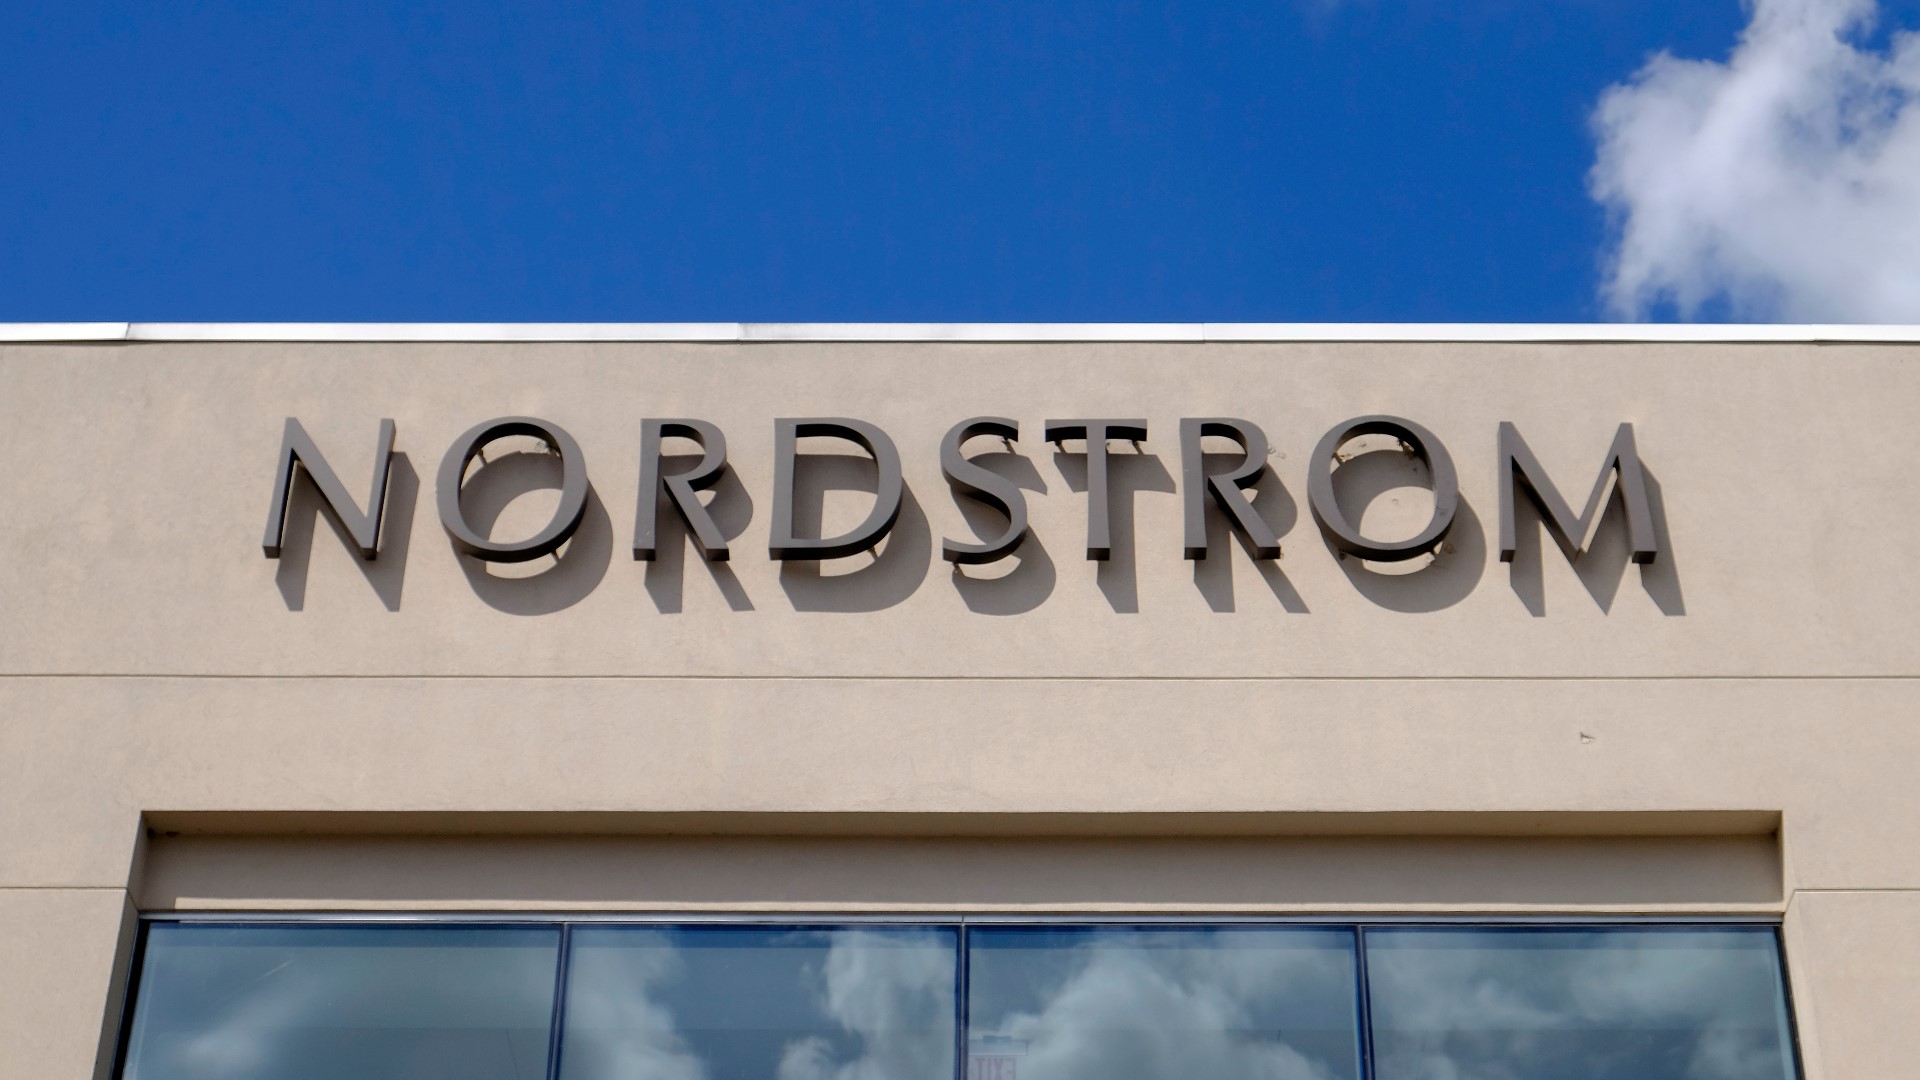 Mall officials said in a statement that they are "saddened by Nordstrom's departure." The store was one of Arden Fair mall's anchor stores for more than 30 years.